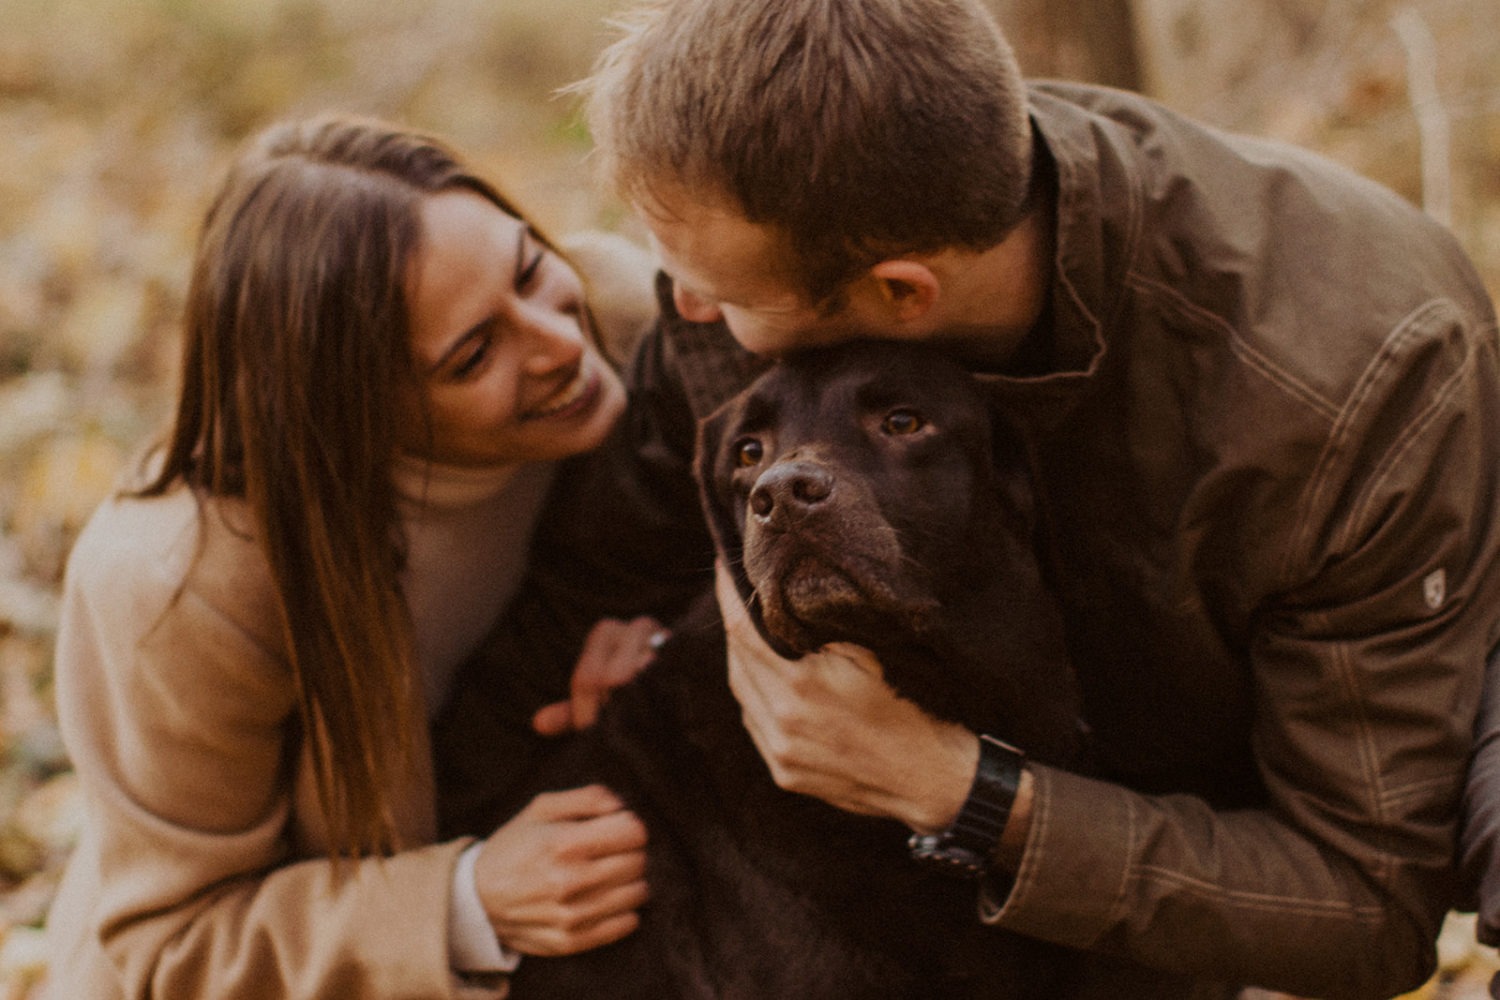 couple snuggles dog together at fall engagement photos session